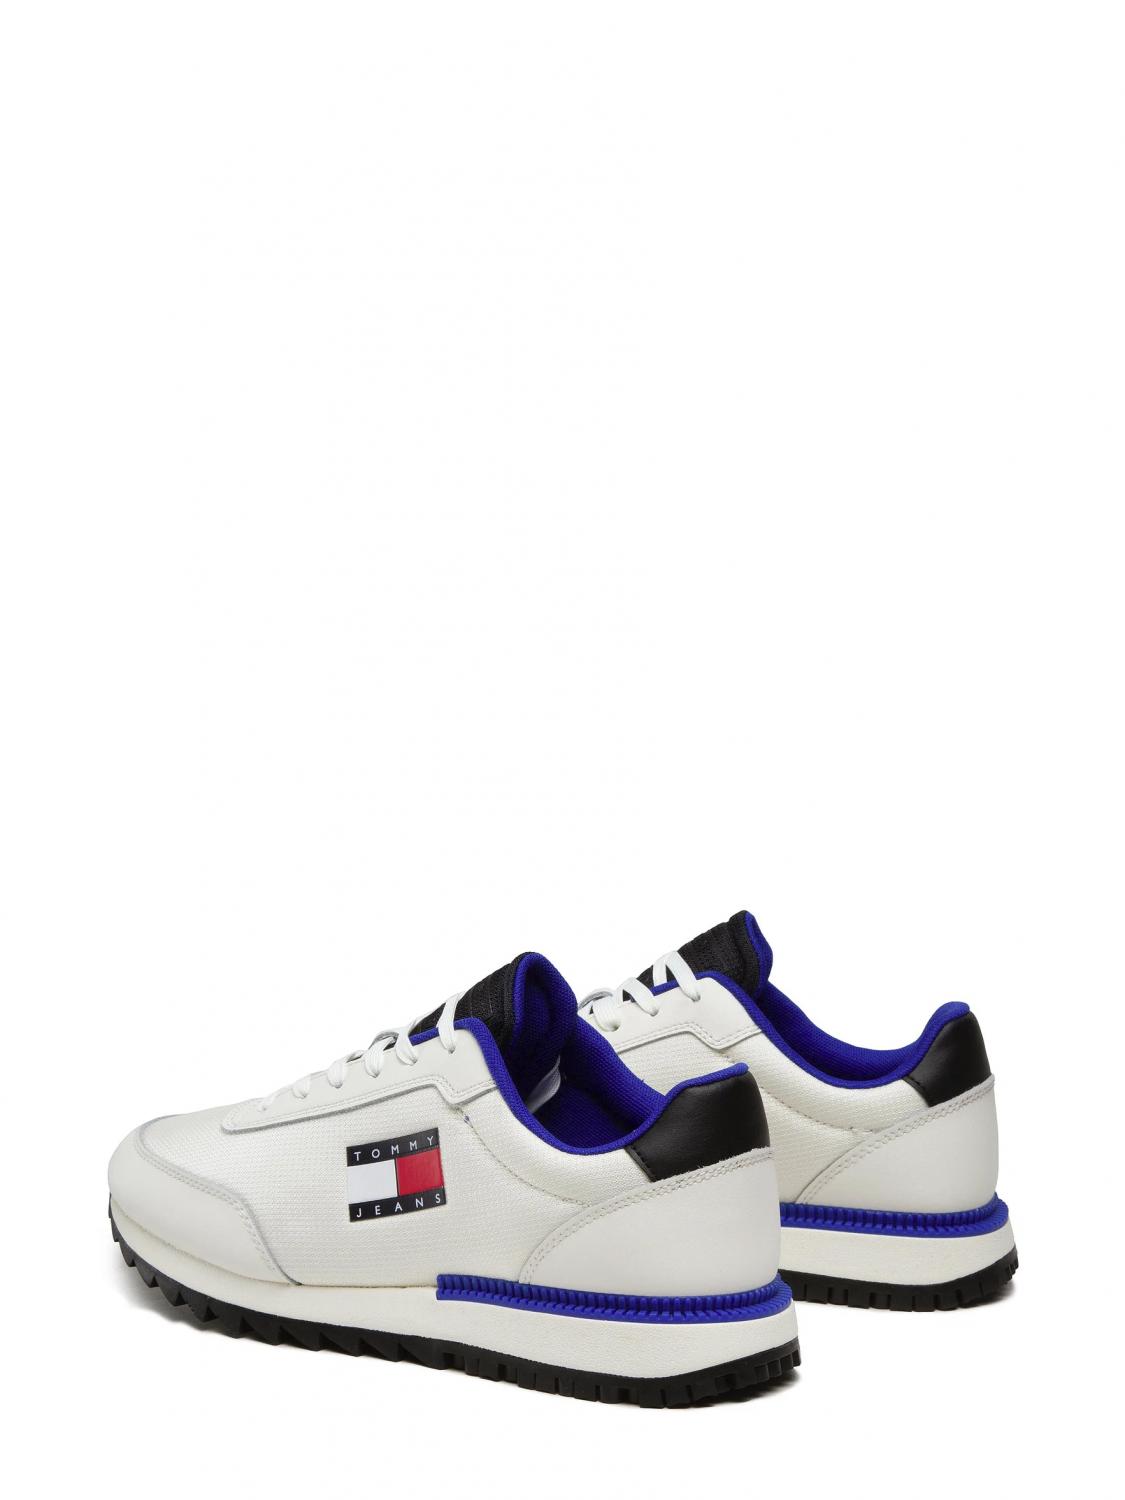 Hilfiger Tommy Jeans Retro Ev Men's Sneakers Ivory - Buy At Outlet Prices!